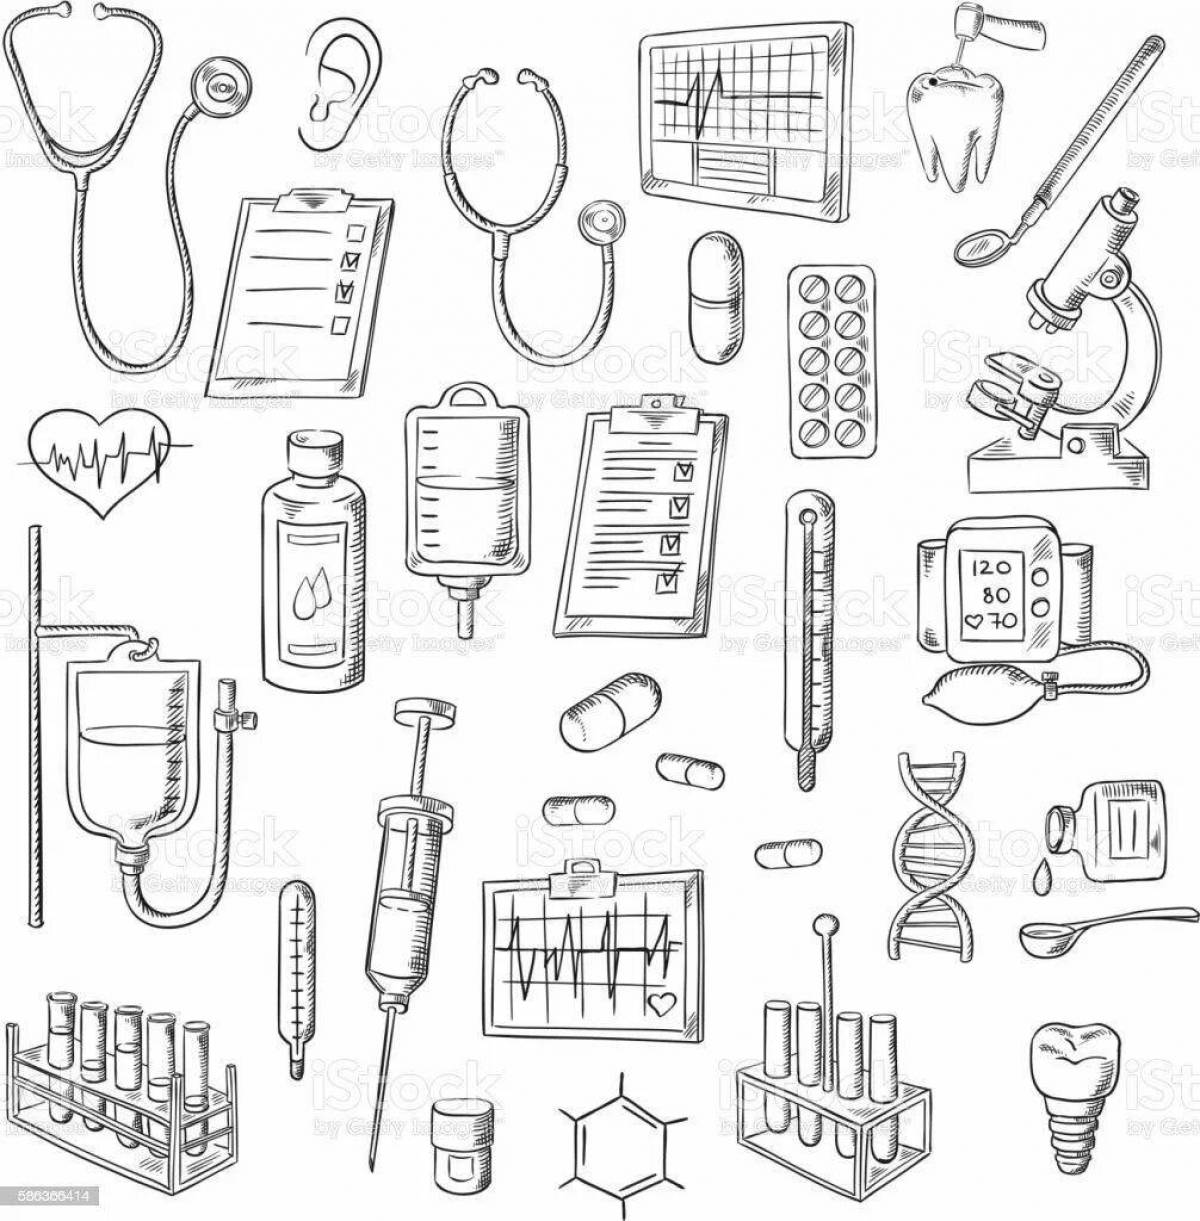 Fun coloring of medical instruments